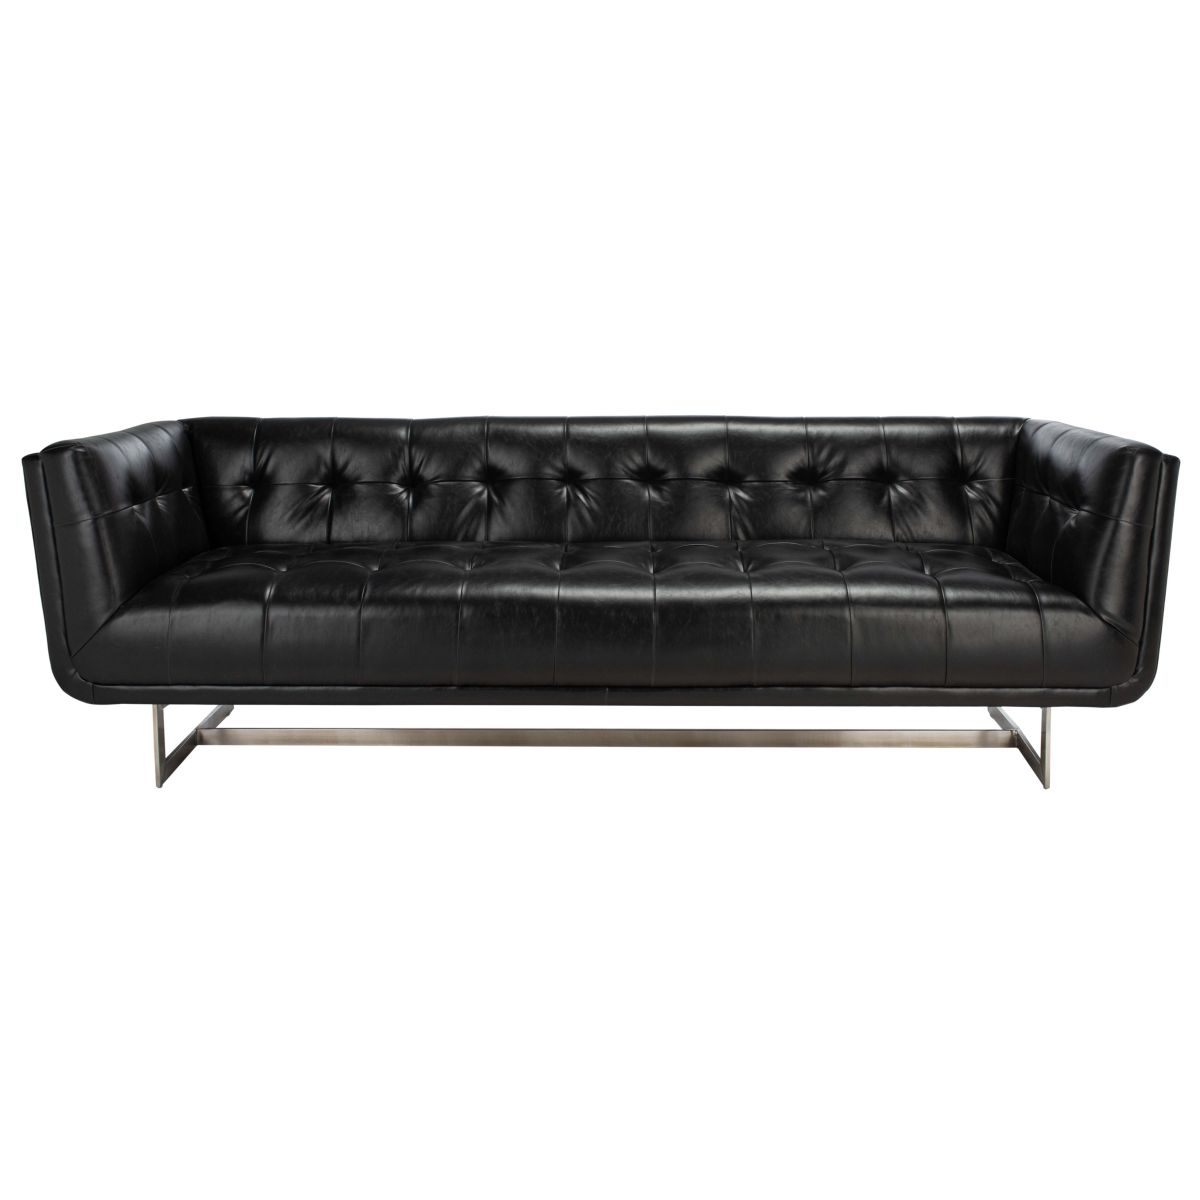 Safavieh Couture Mcneill Tufted Sofa